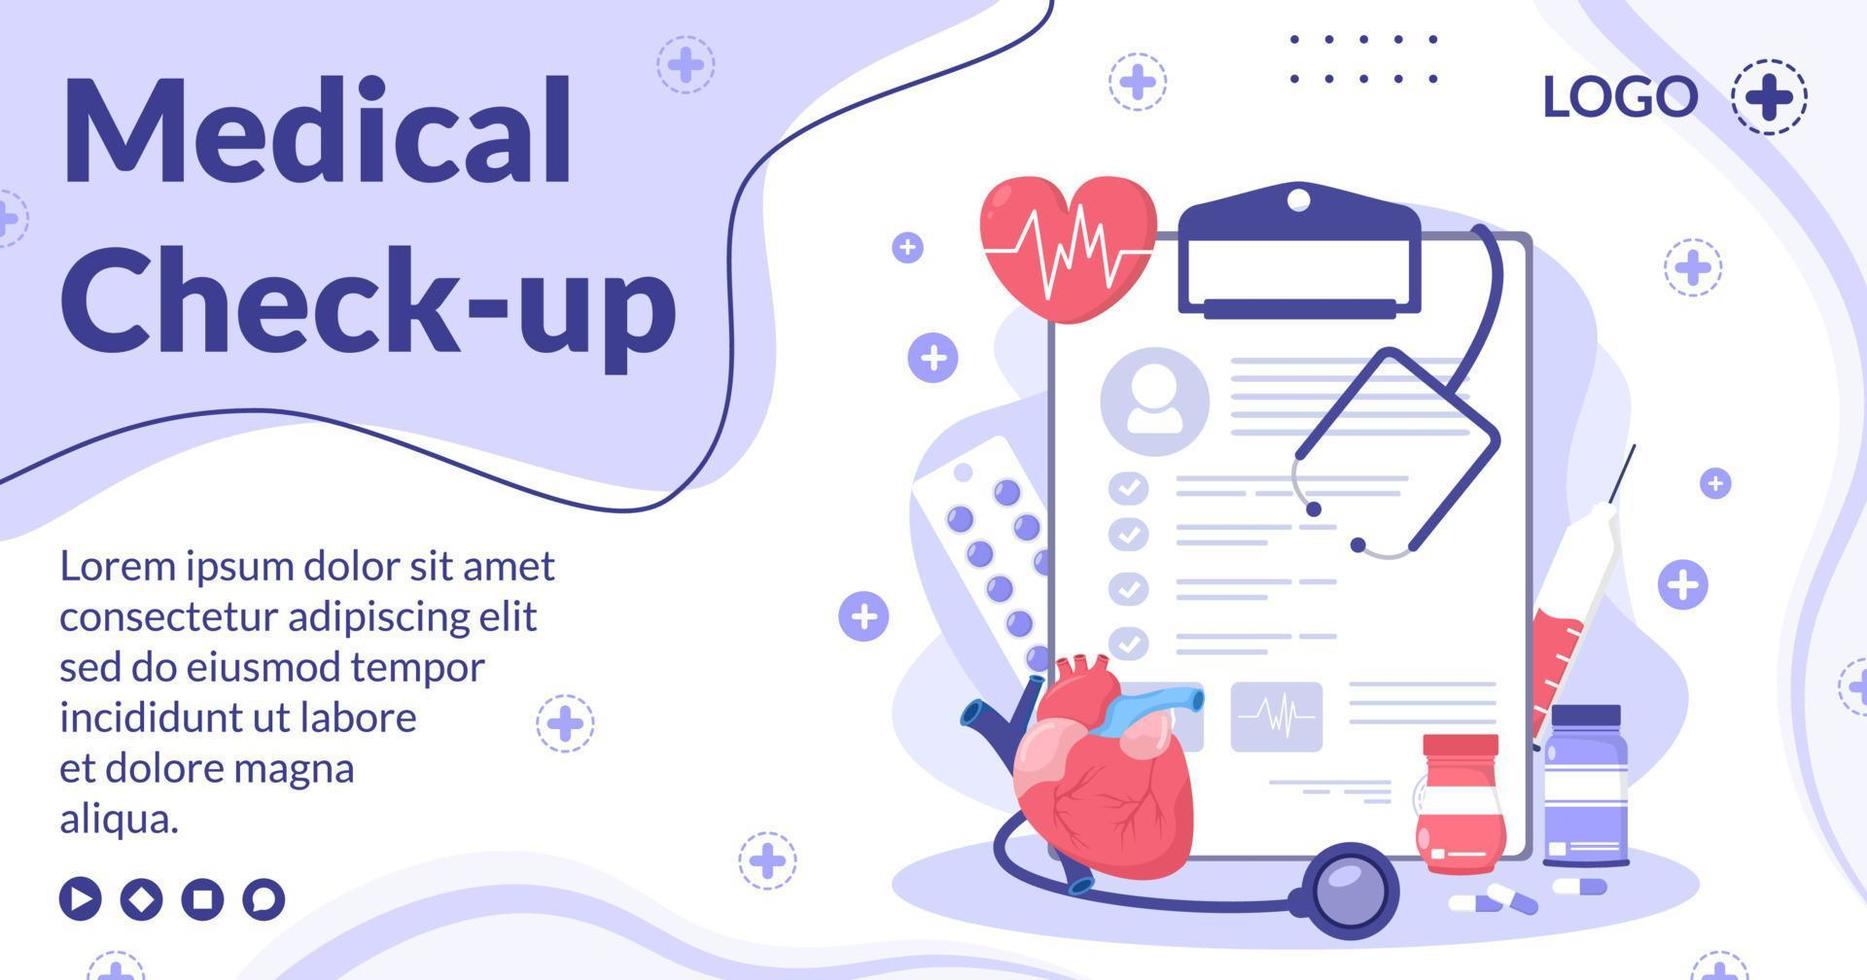 Medical Check up Post Template Health care Flat Design Illustration Editable of Square Background for Social Media, Greeting Card or Web vector